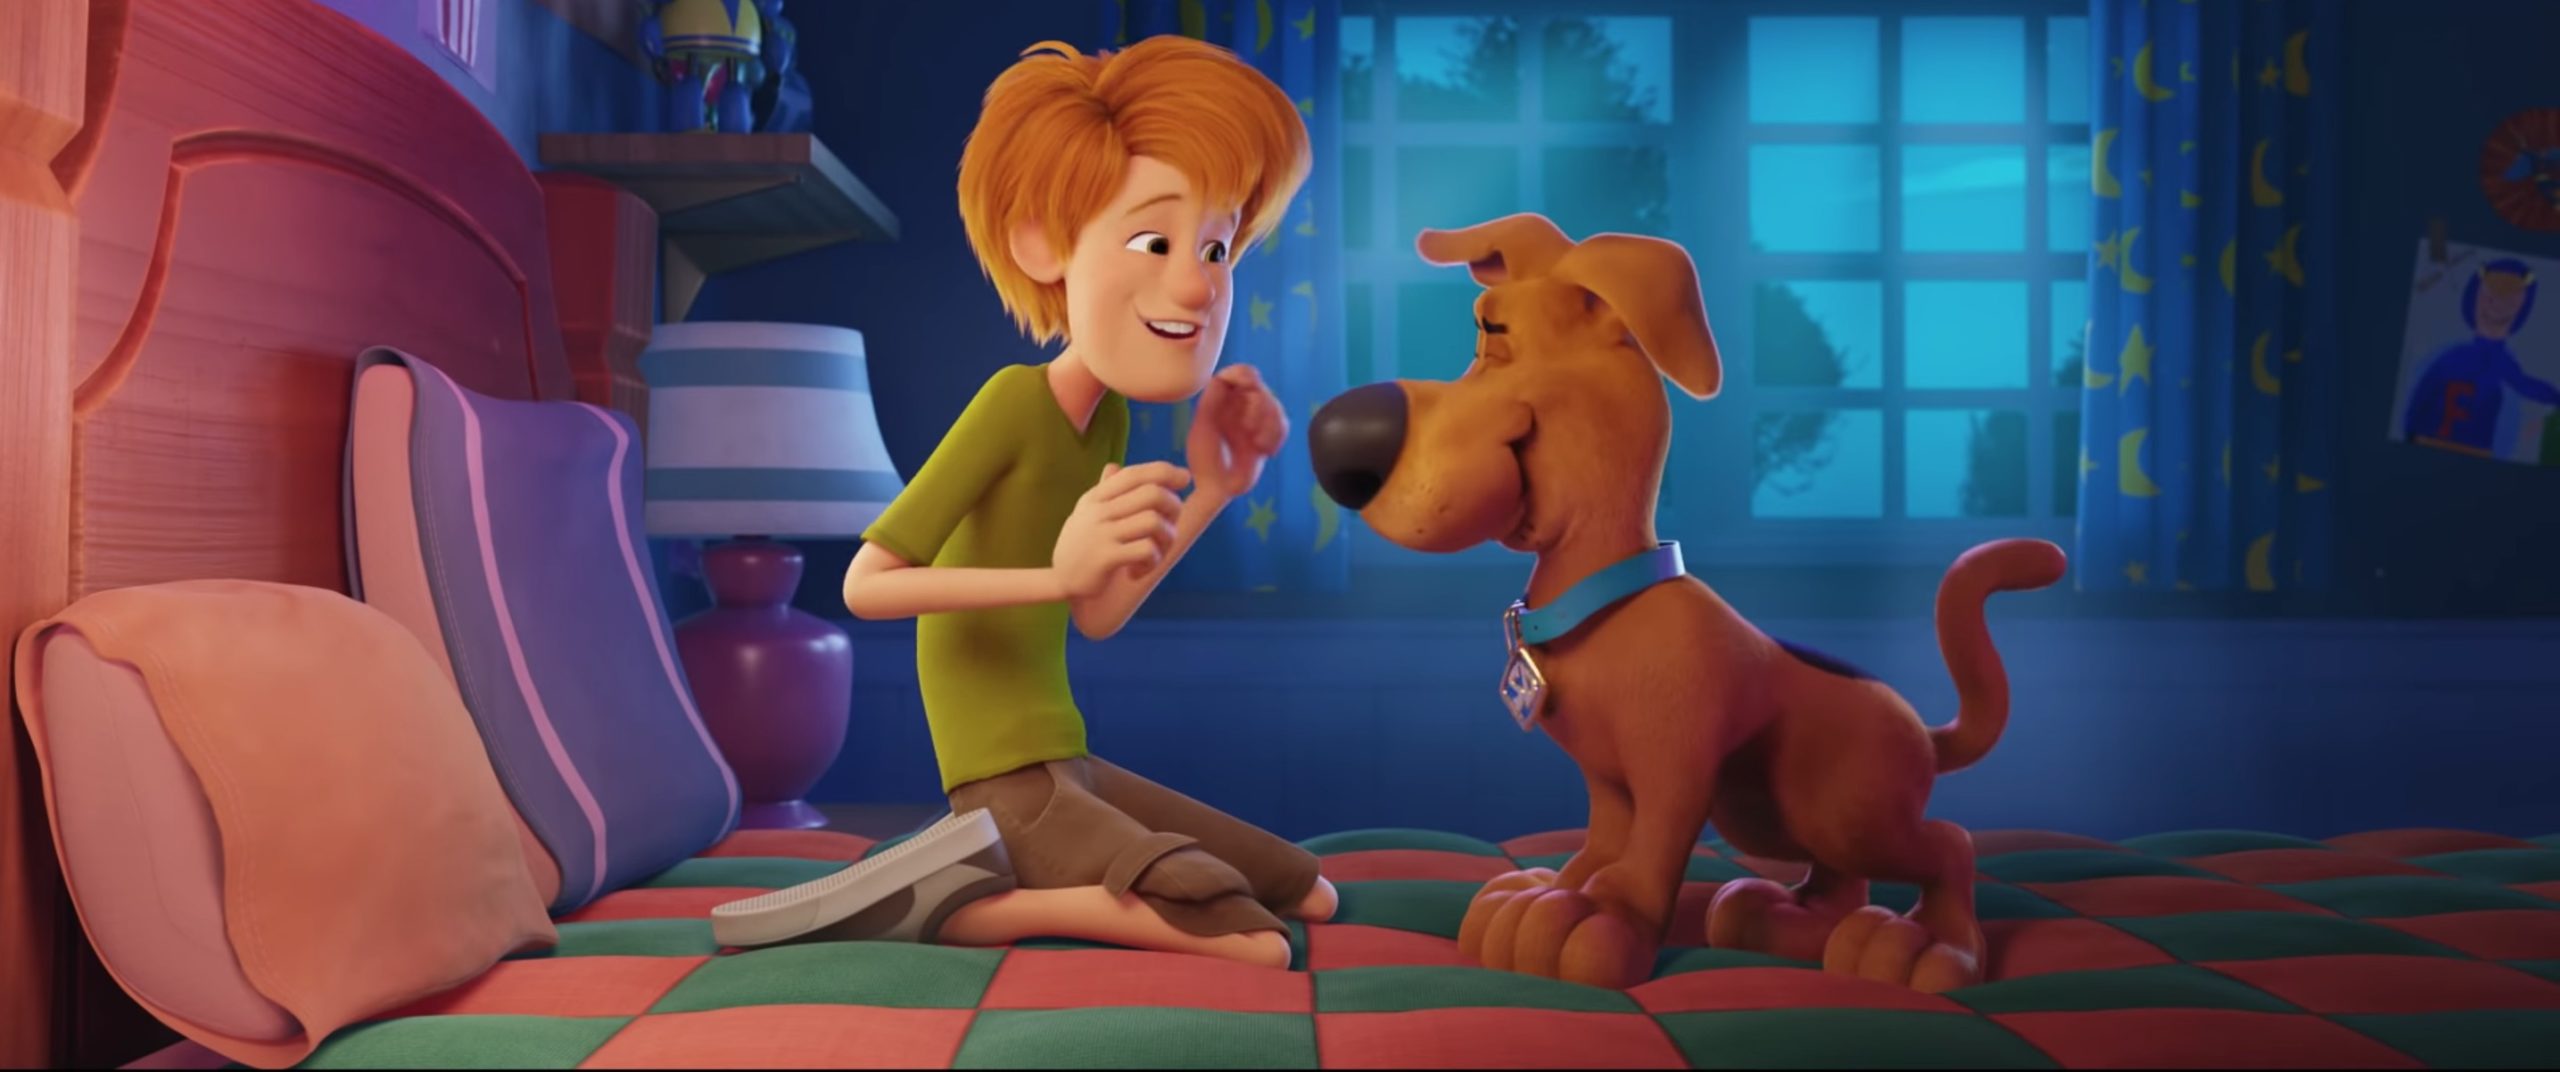 Scoob trailer - Get a glimpse of the new Scooby Doo film ...